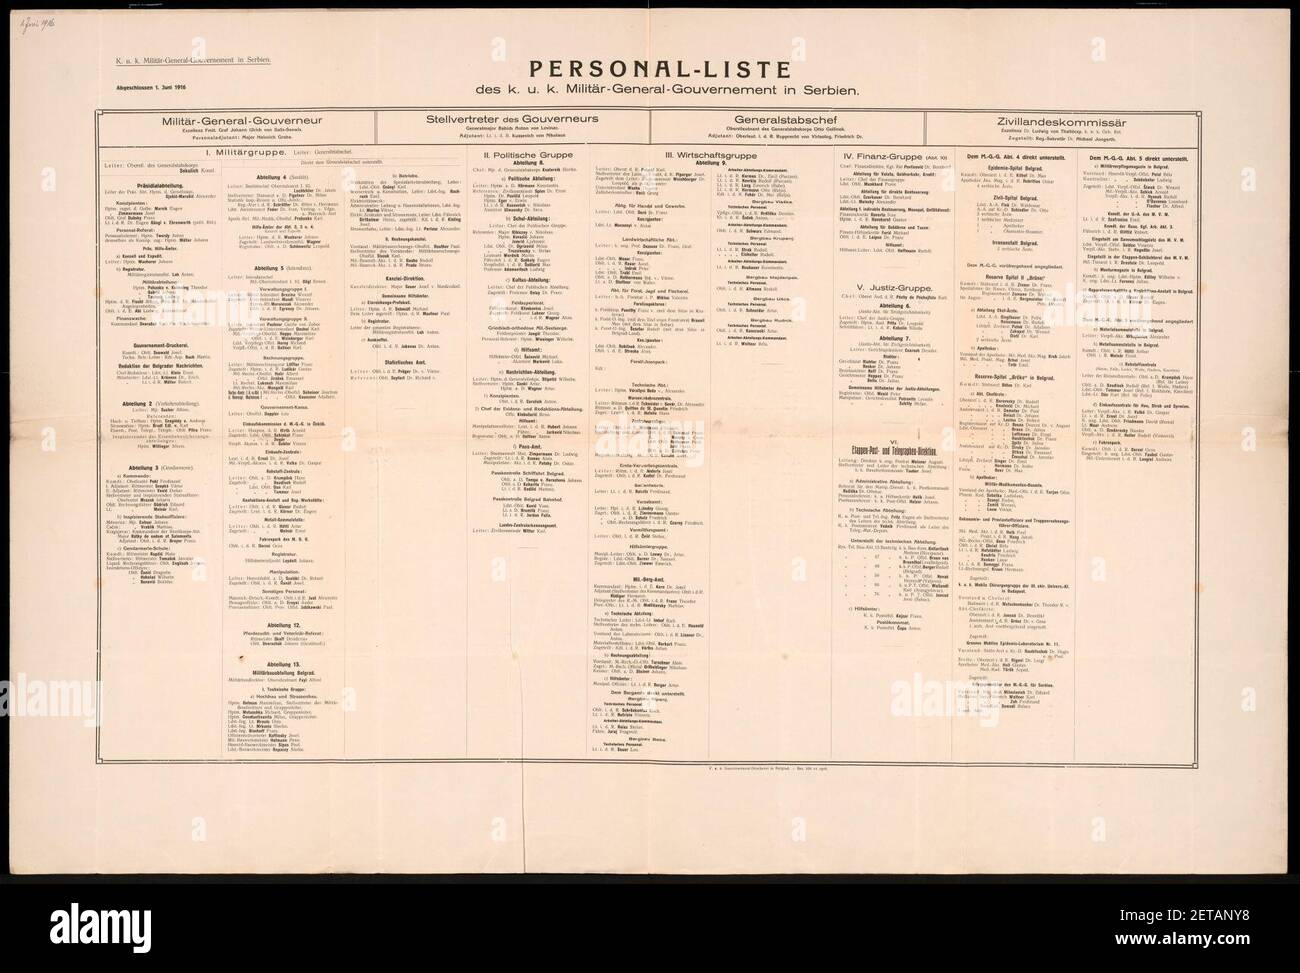 Personnel list of the Austro-Hungarian Military General Gouvernement in Serbia. Stock Photo